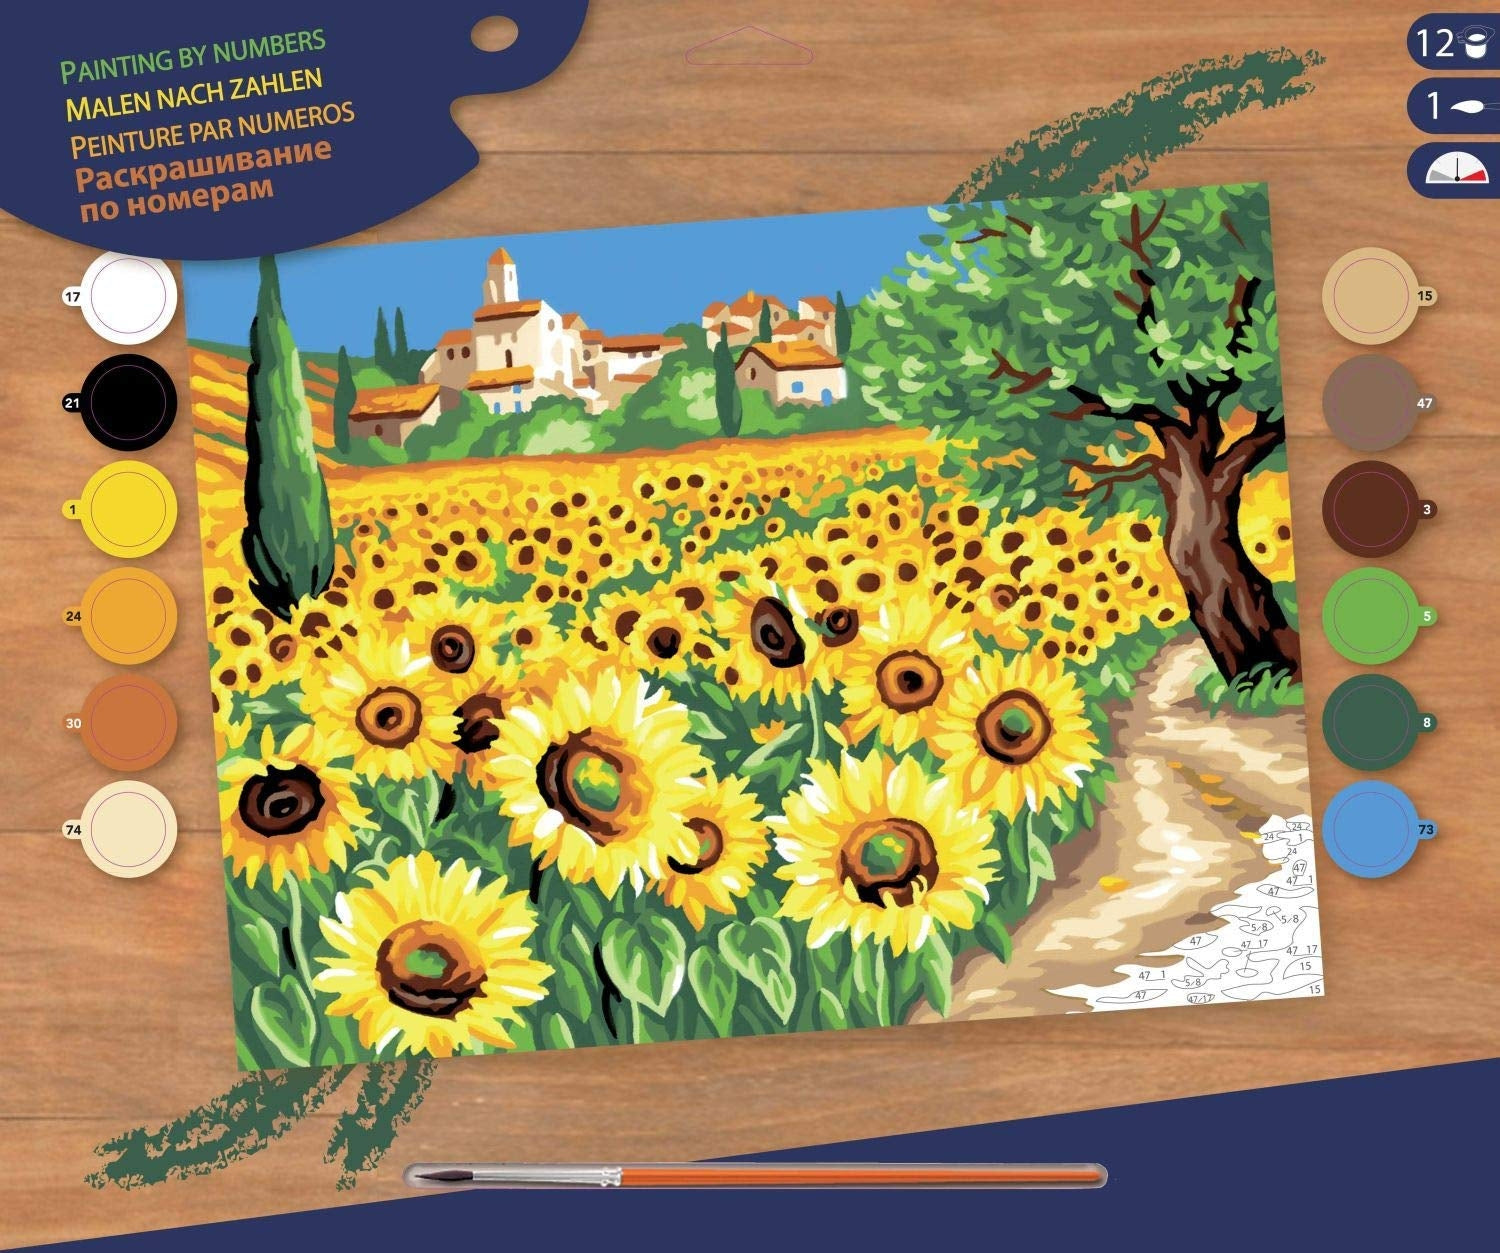 KSG - Large Painting By Numbers - Sunflowers